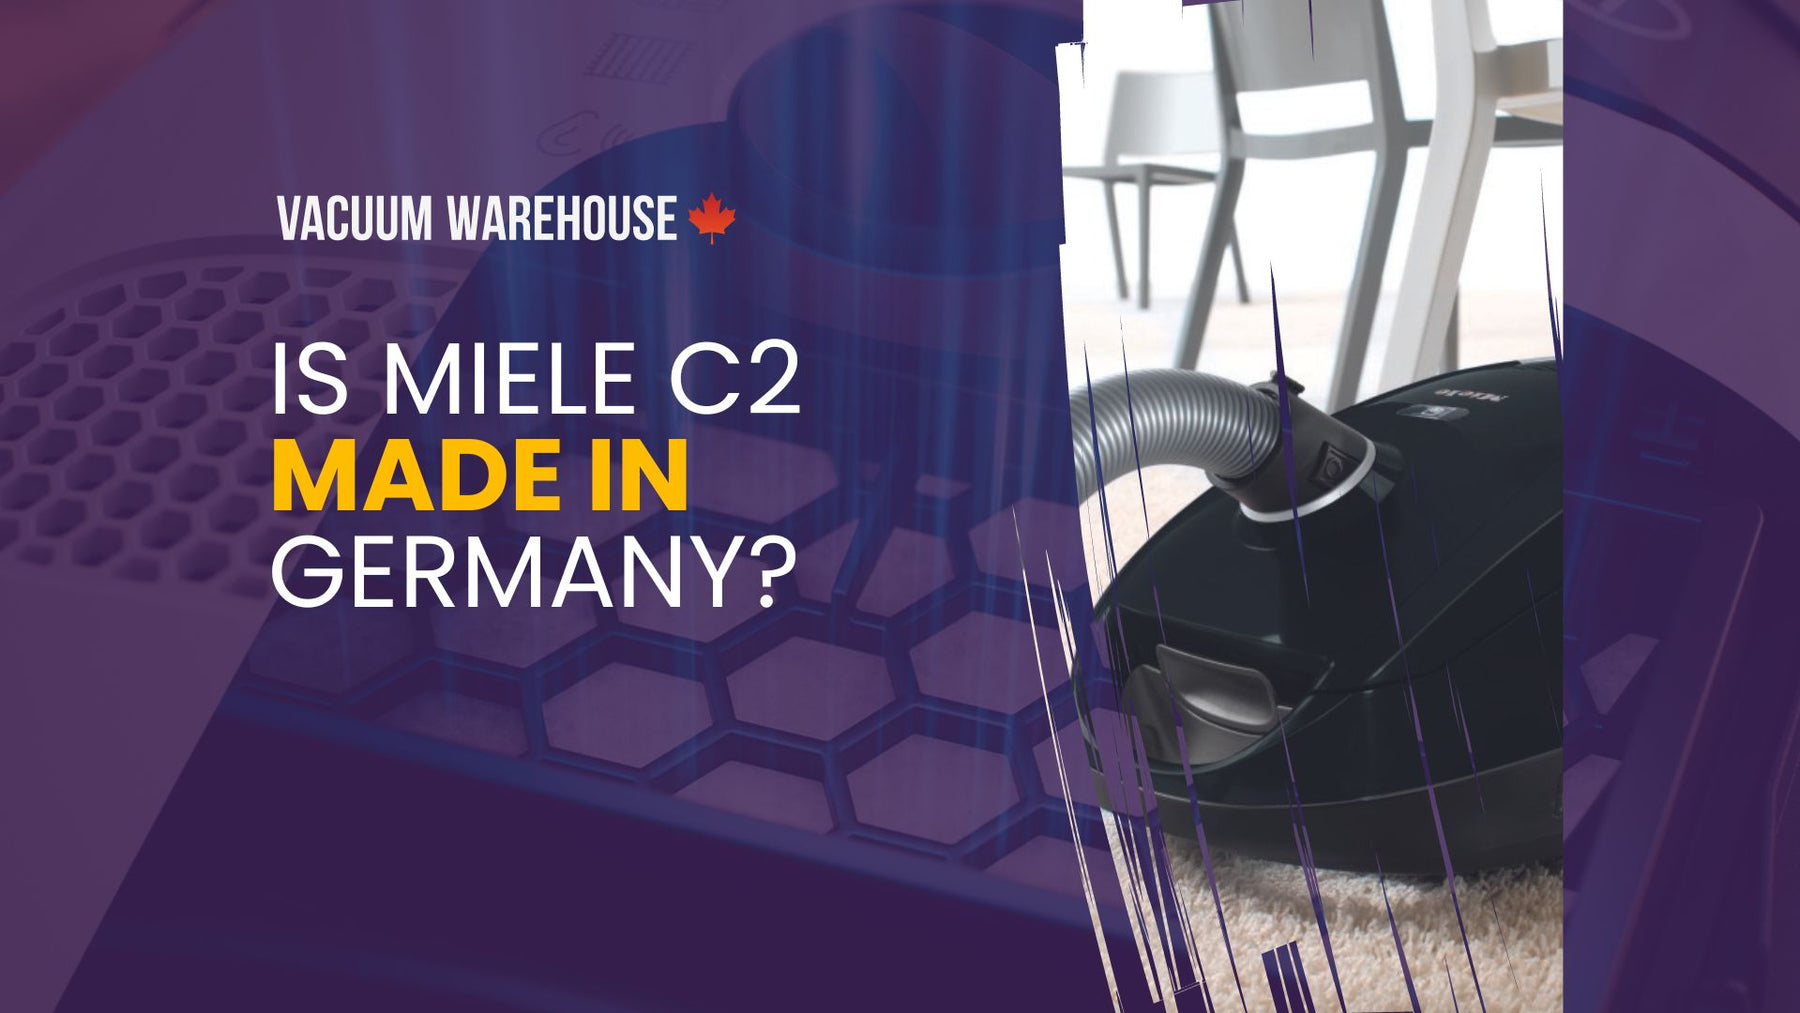 Is Miele C2 Made in Germany?